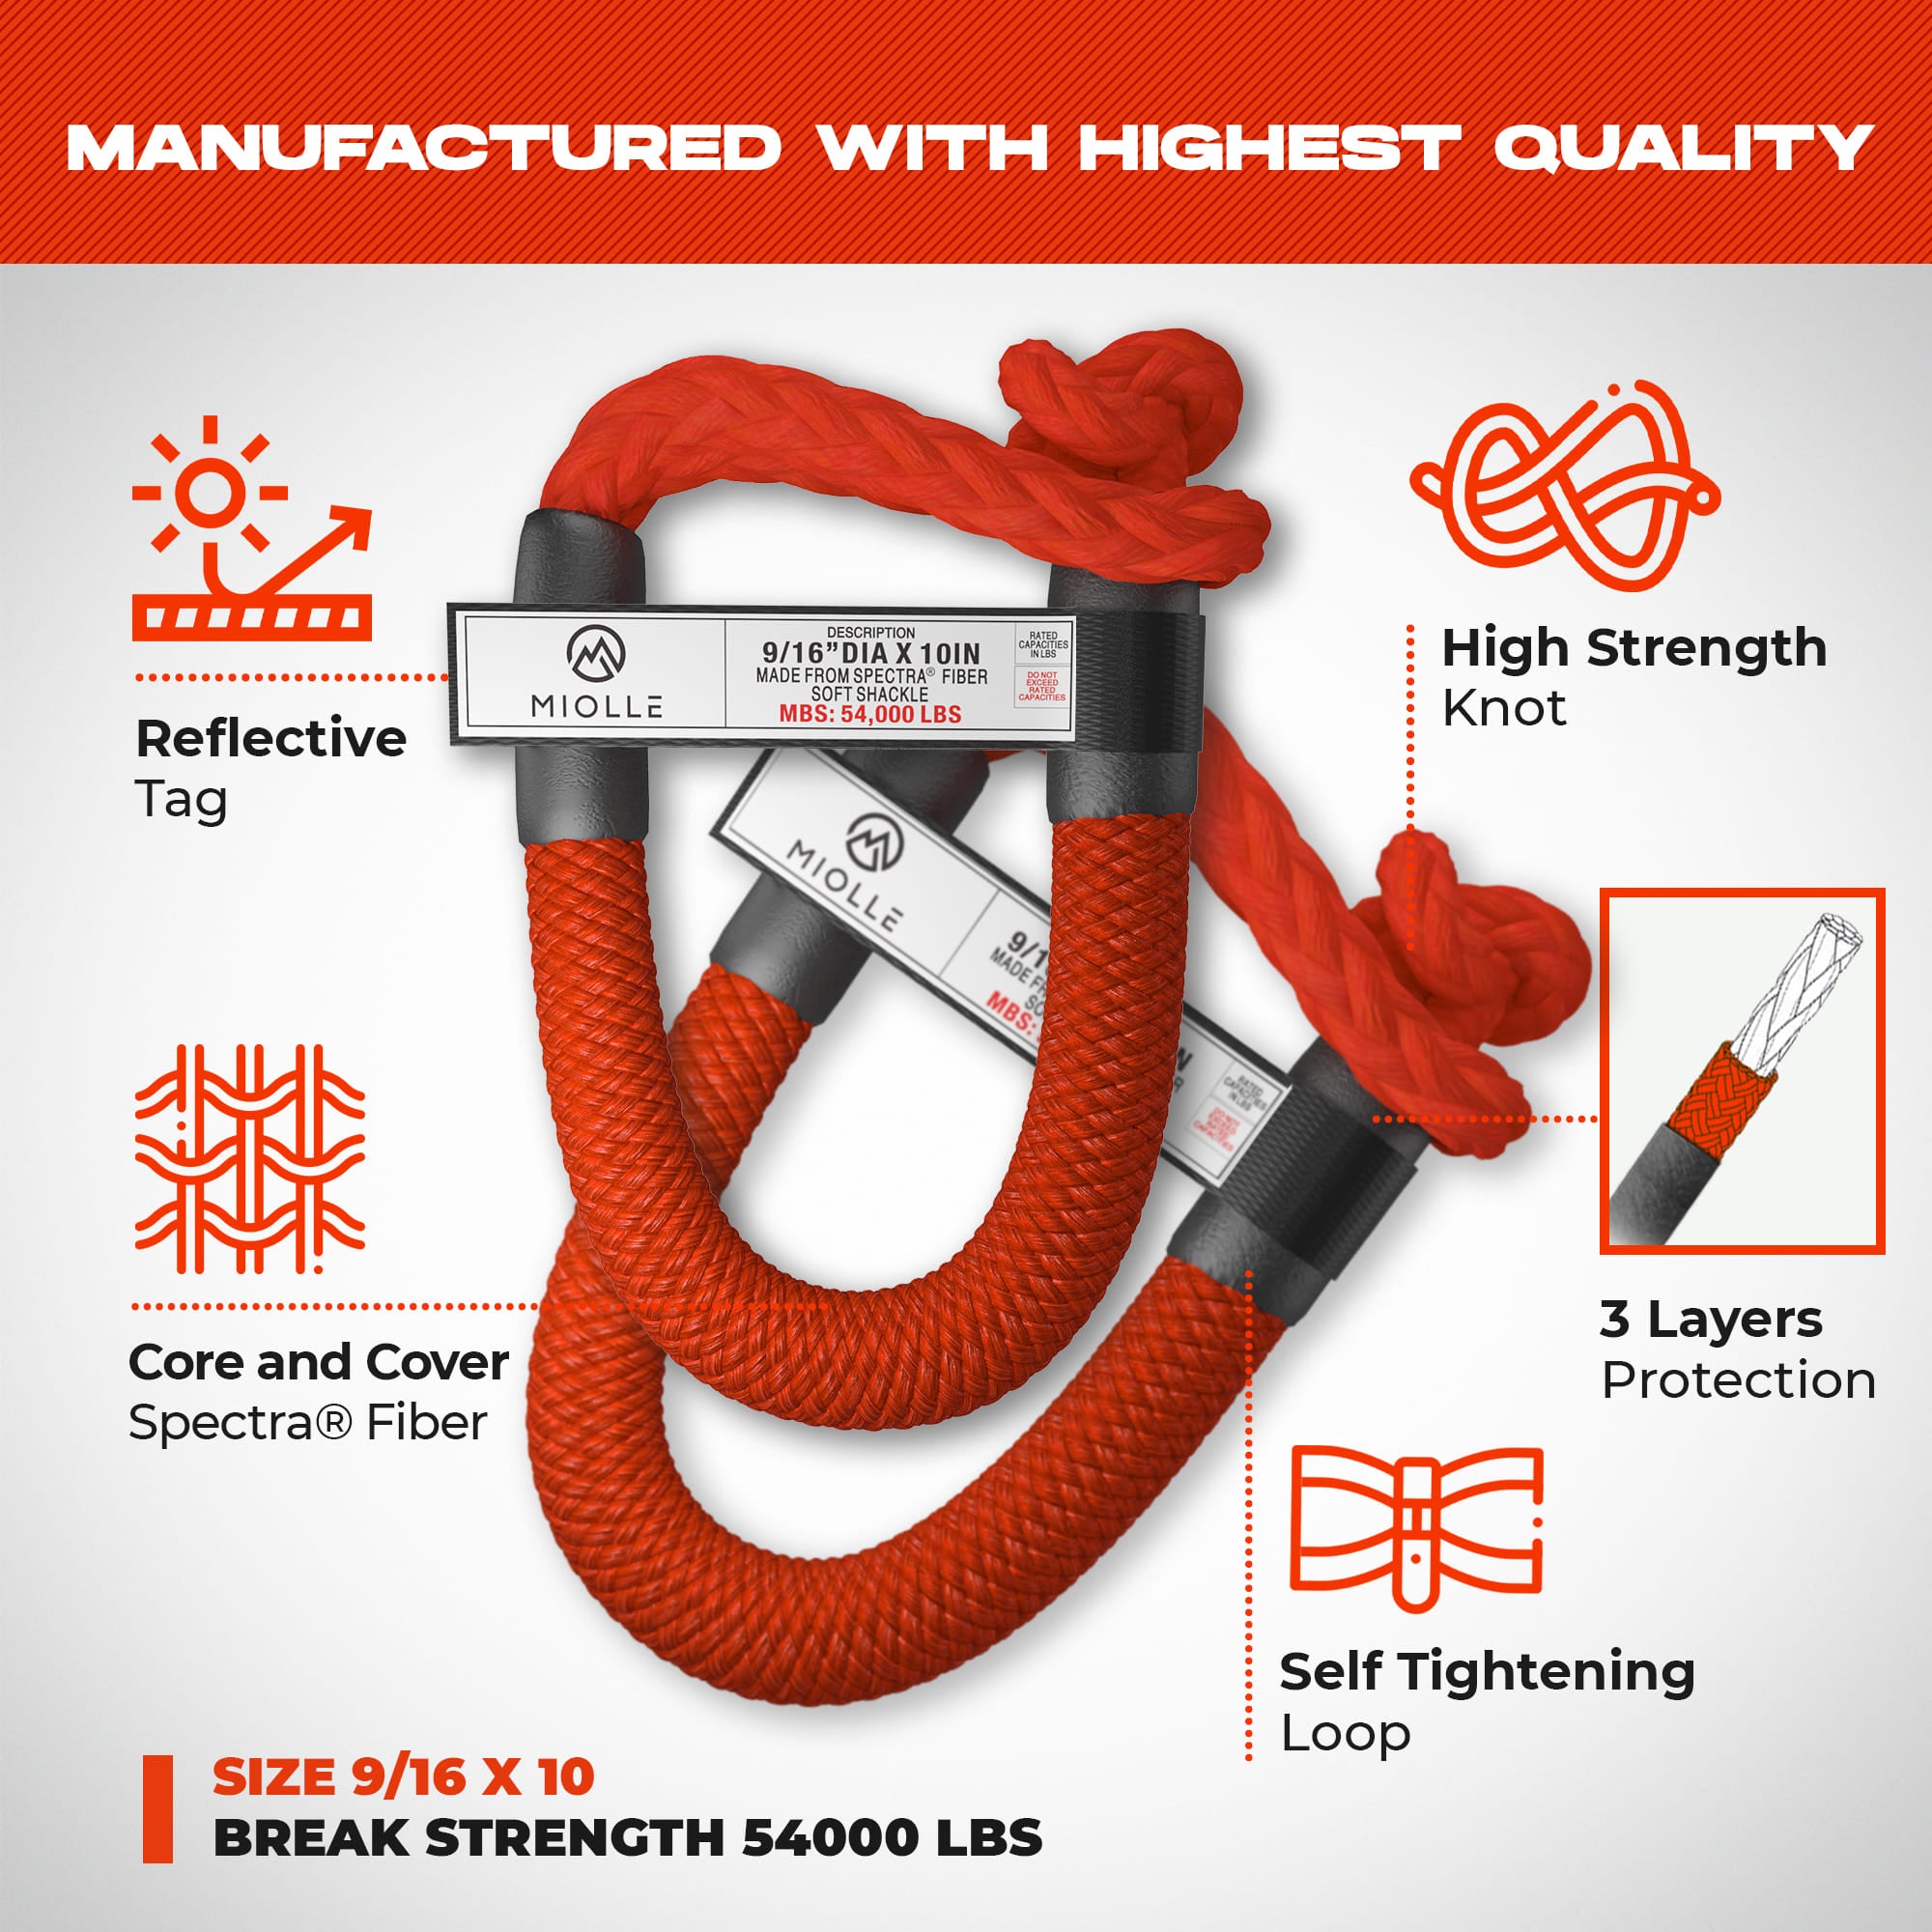 Miolle Heavy Duty 1-1/4' x 30' Kinetic Recovery & Tow Rope, Red (53000 lbs), Wi